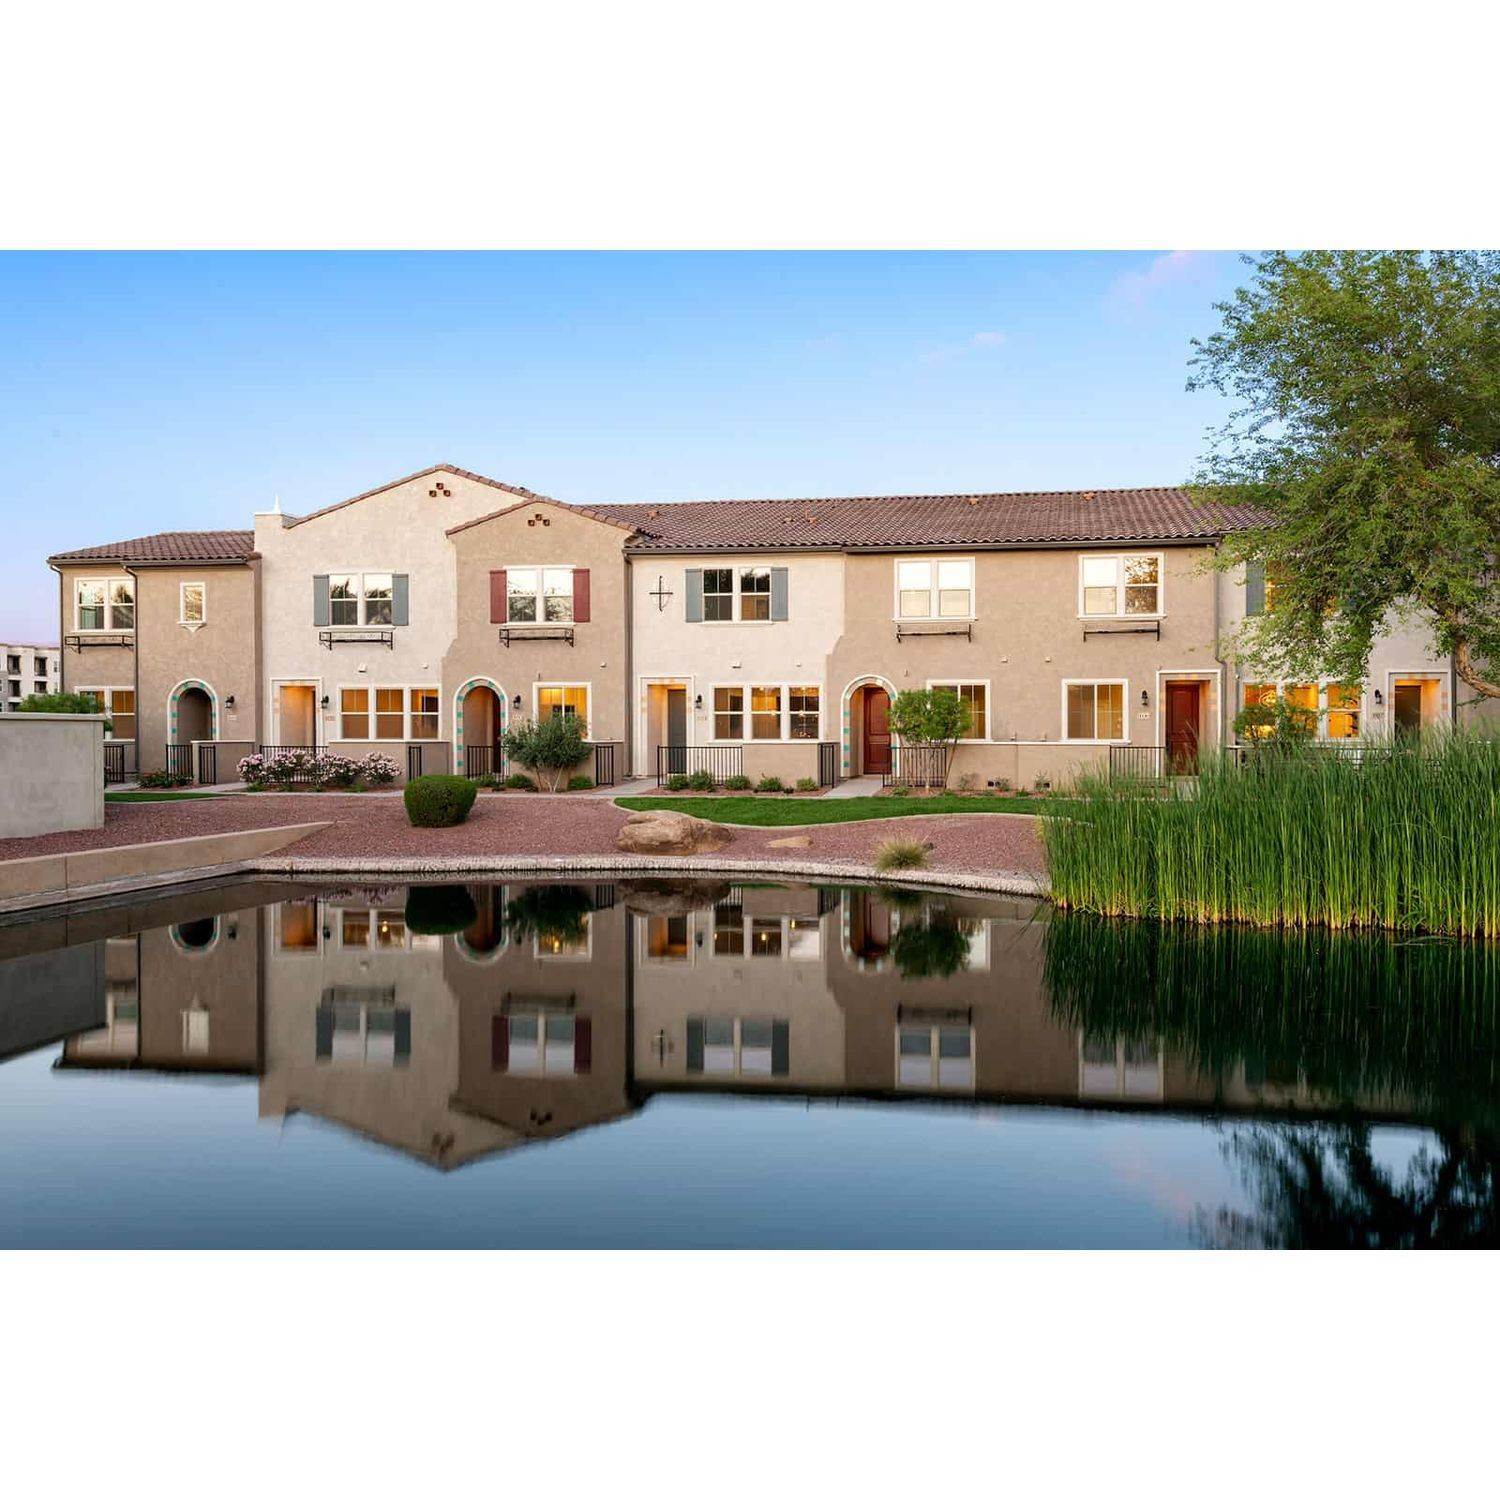 4. The Towns at Annecy building at 2660 S. Equestrian Dr. #110, Gilbert, AZ 85295